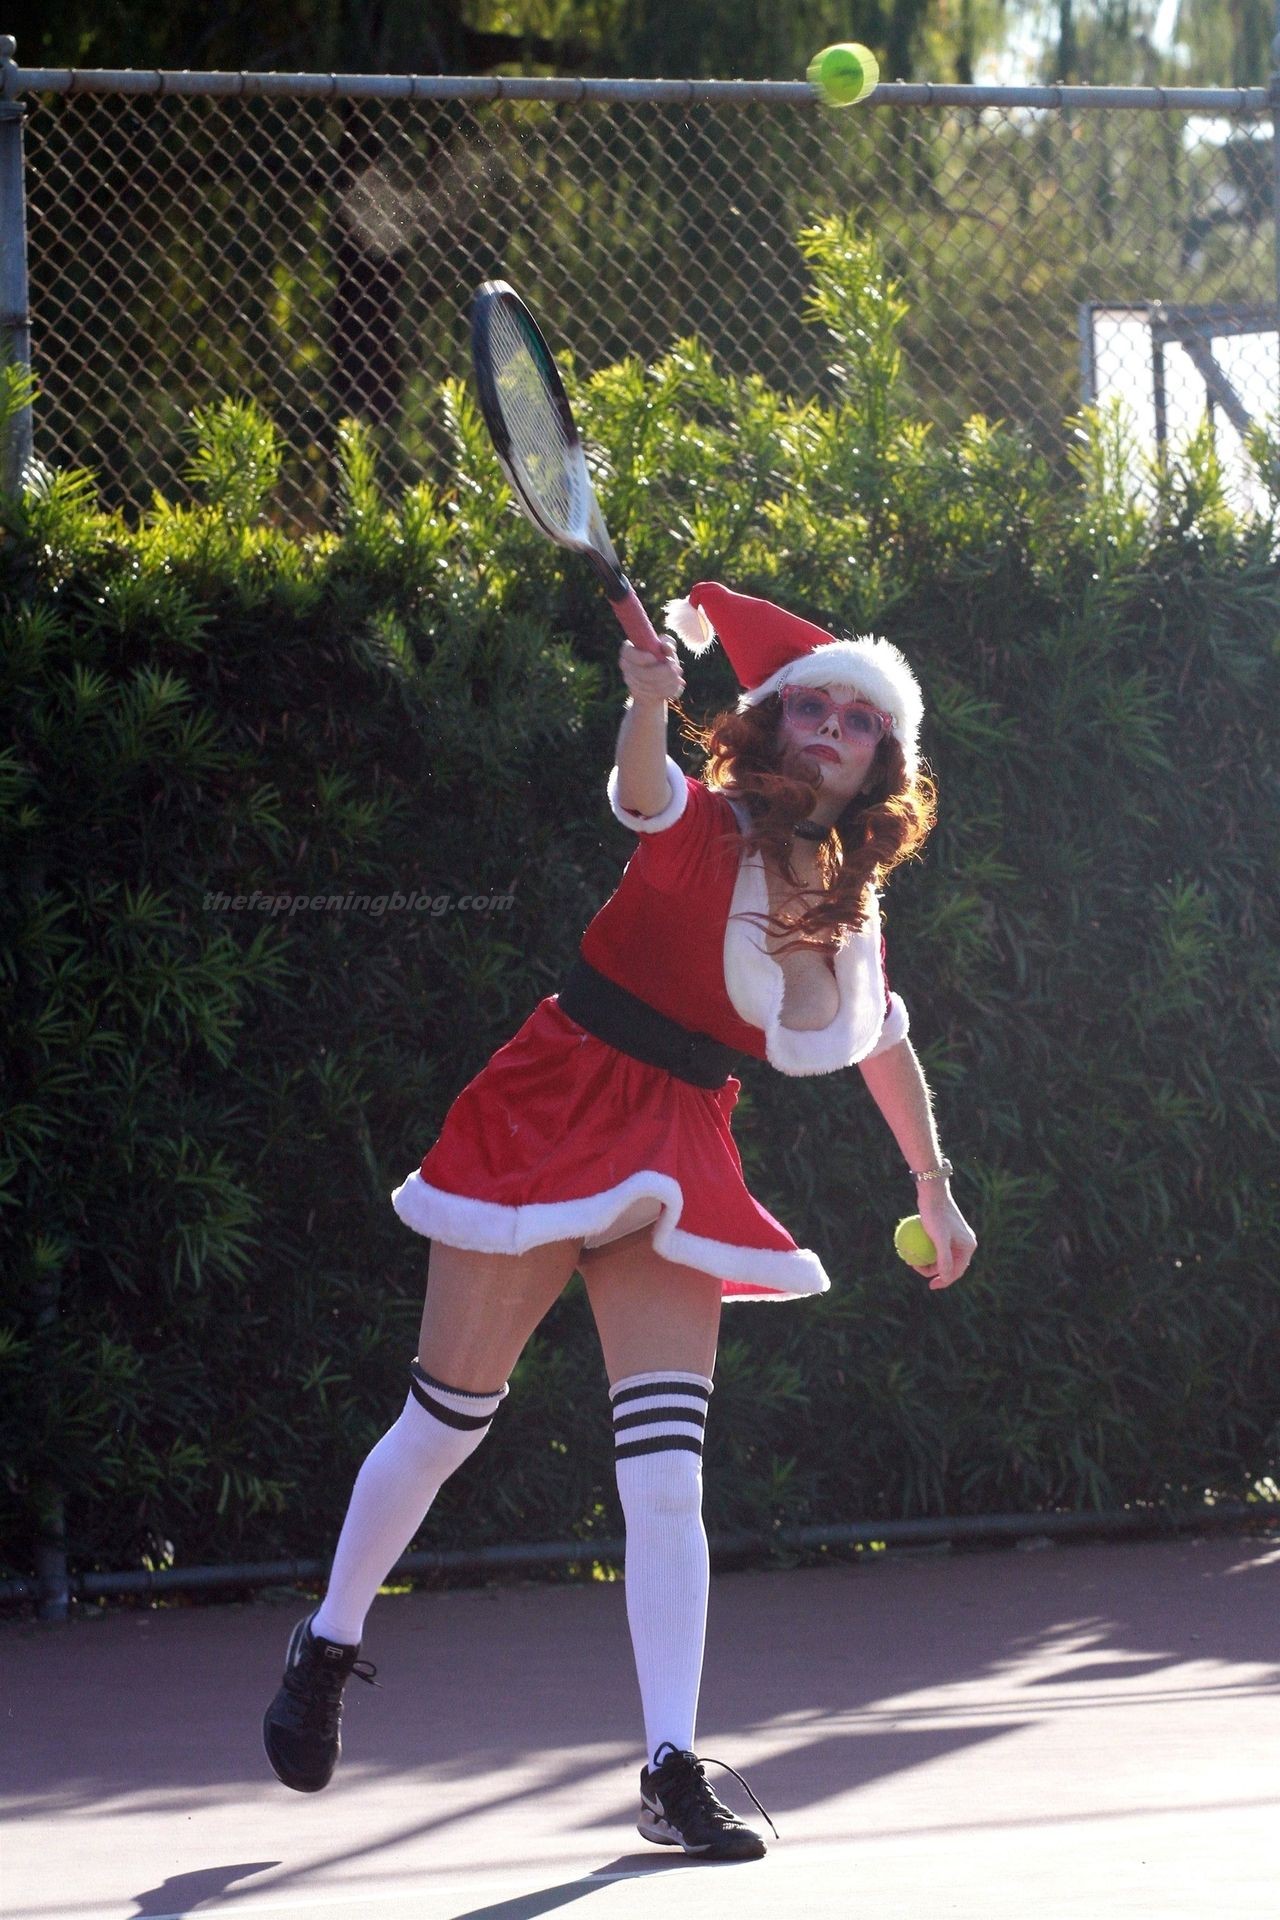 Phoebe Price is Seen in a Mrs. Claus Outfit at the Tennis Cour
ts in LA (55 Photos)